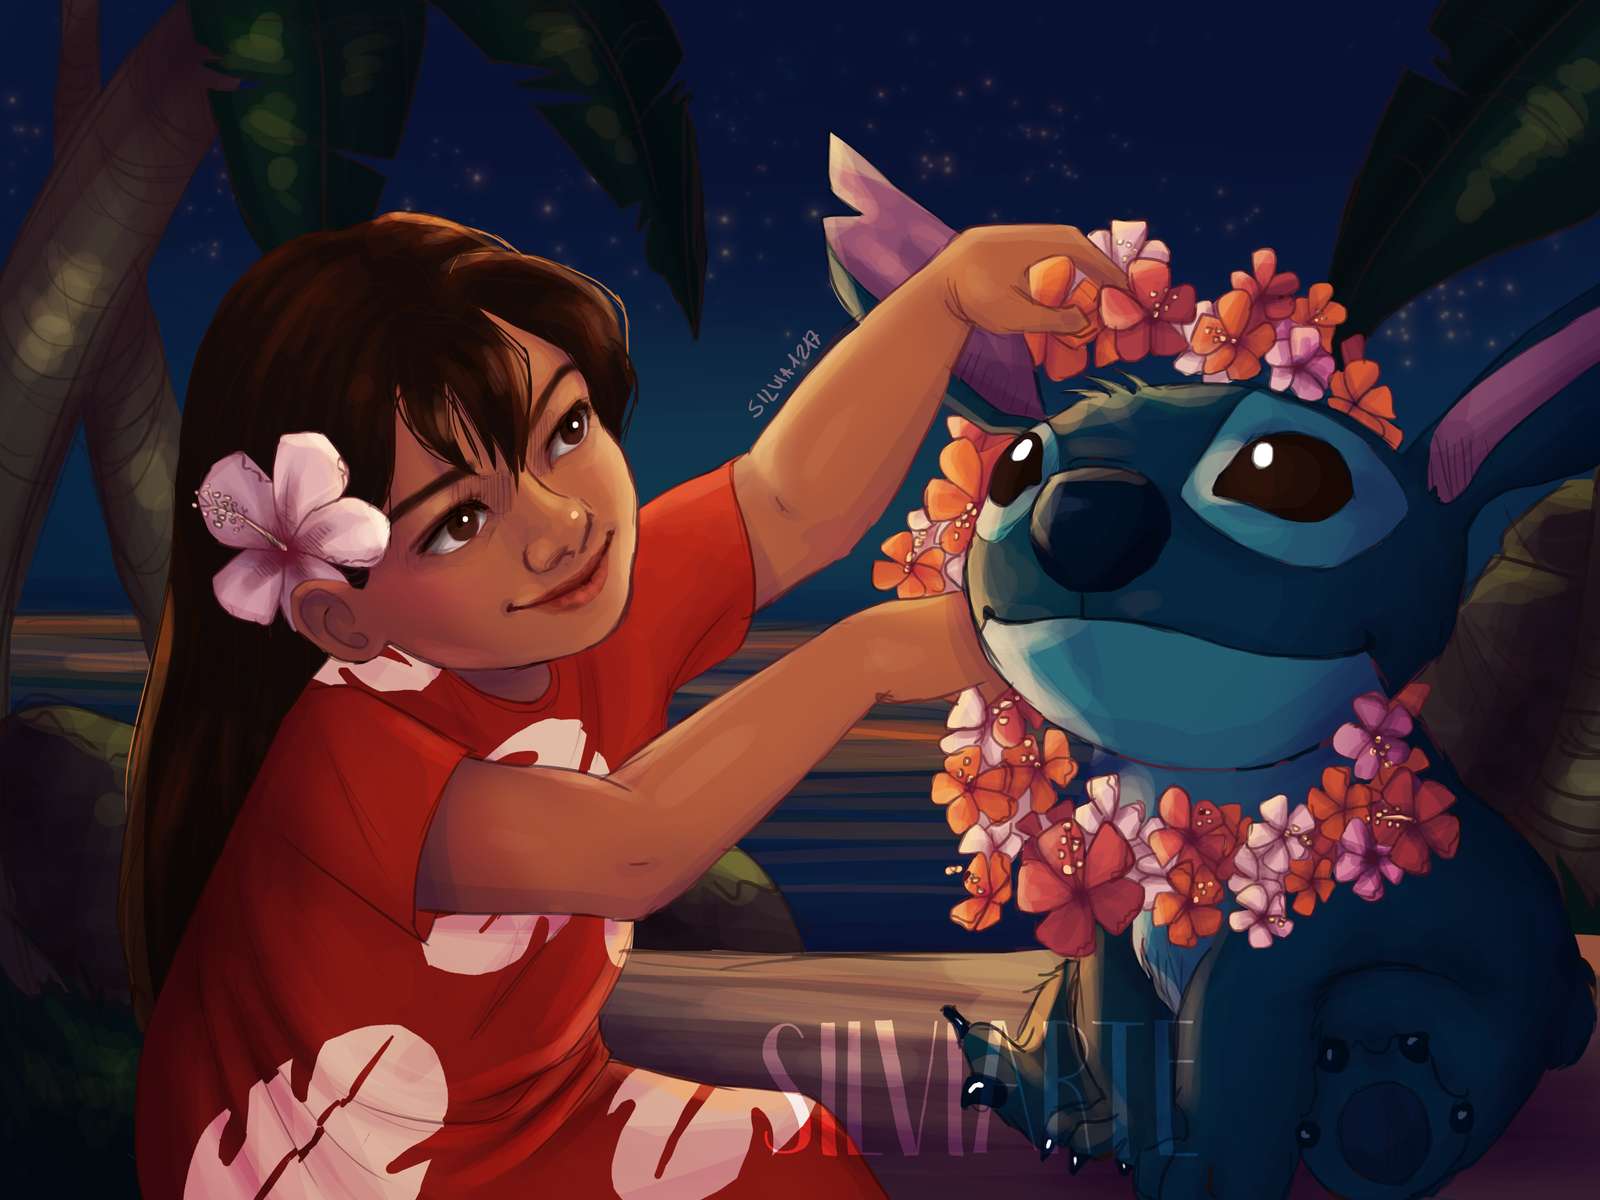 Ohana Means Family: Lilo and Stitch online puzzle